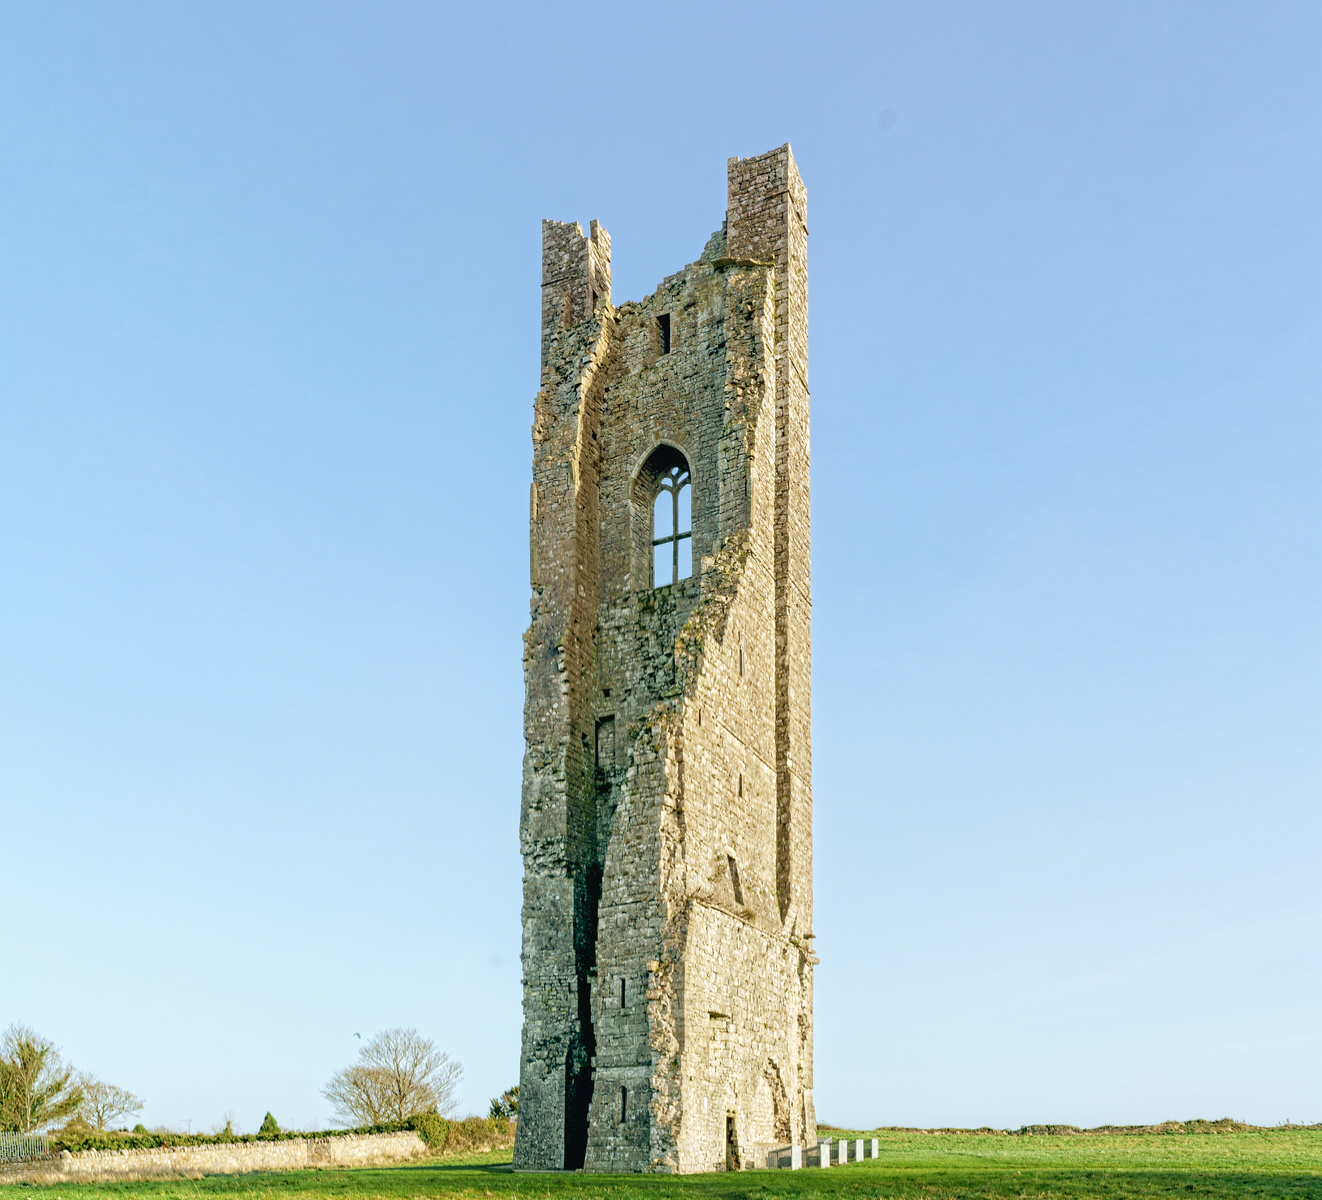 THIS IS ALL THAT REMAINS OF ST MARYS ABBEY IN TRIM COUNTY MEATH